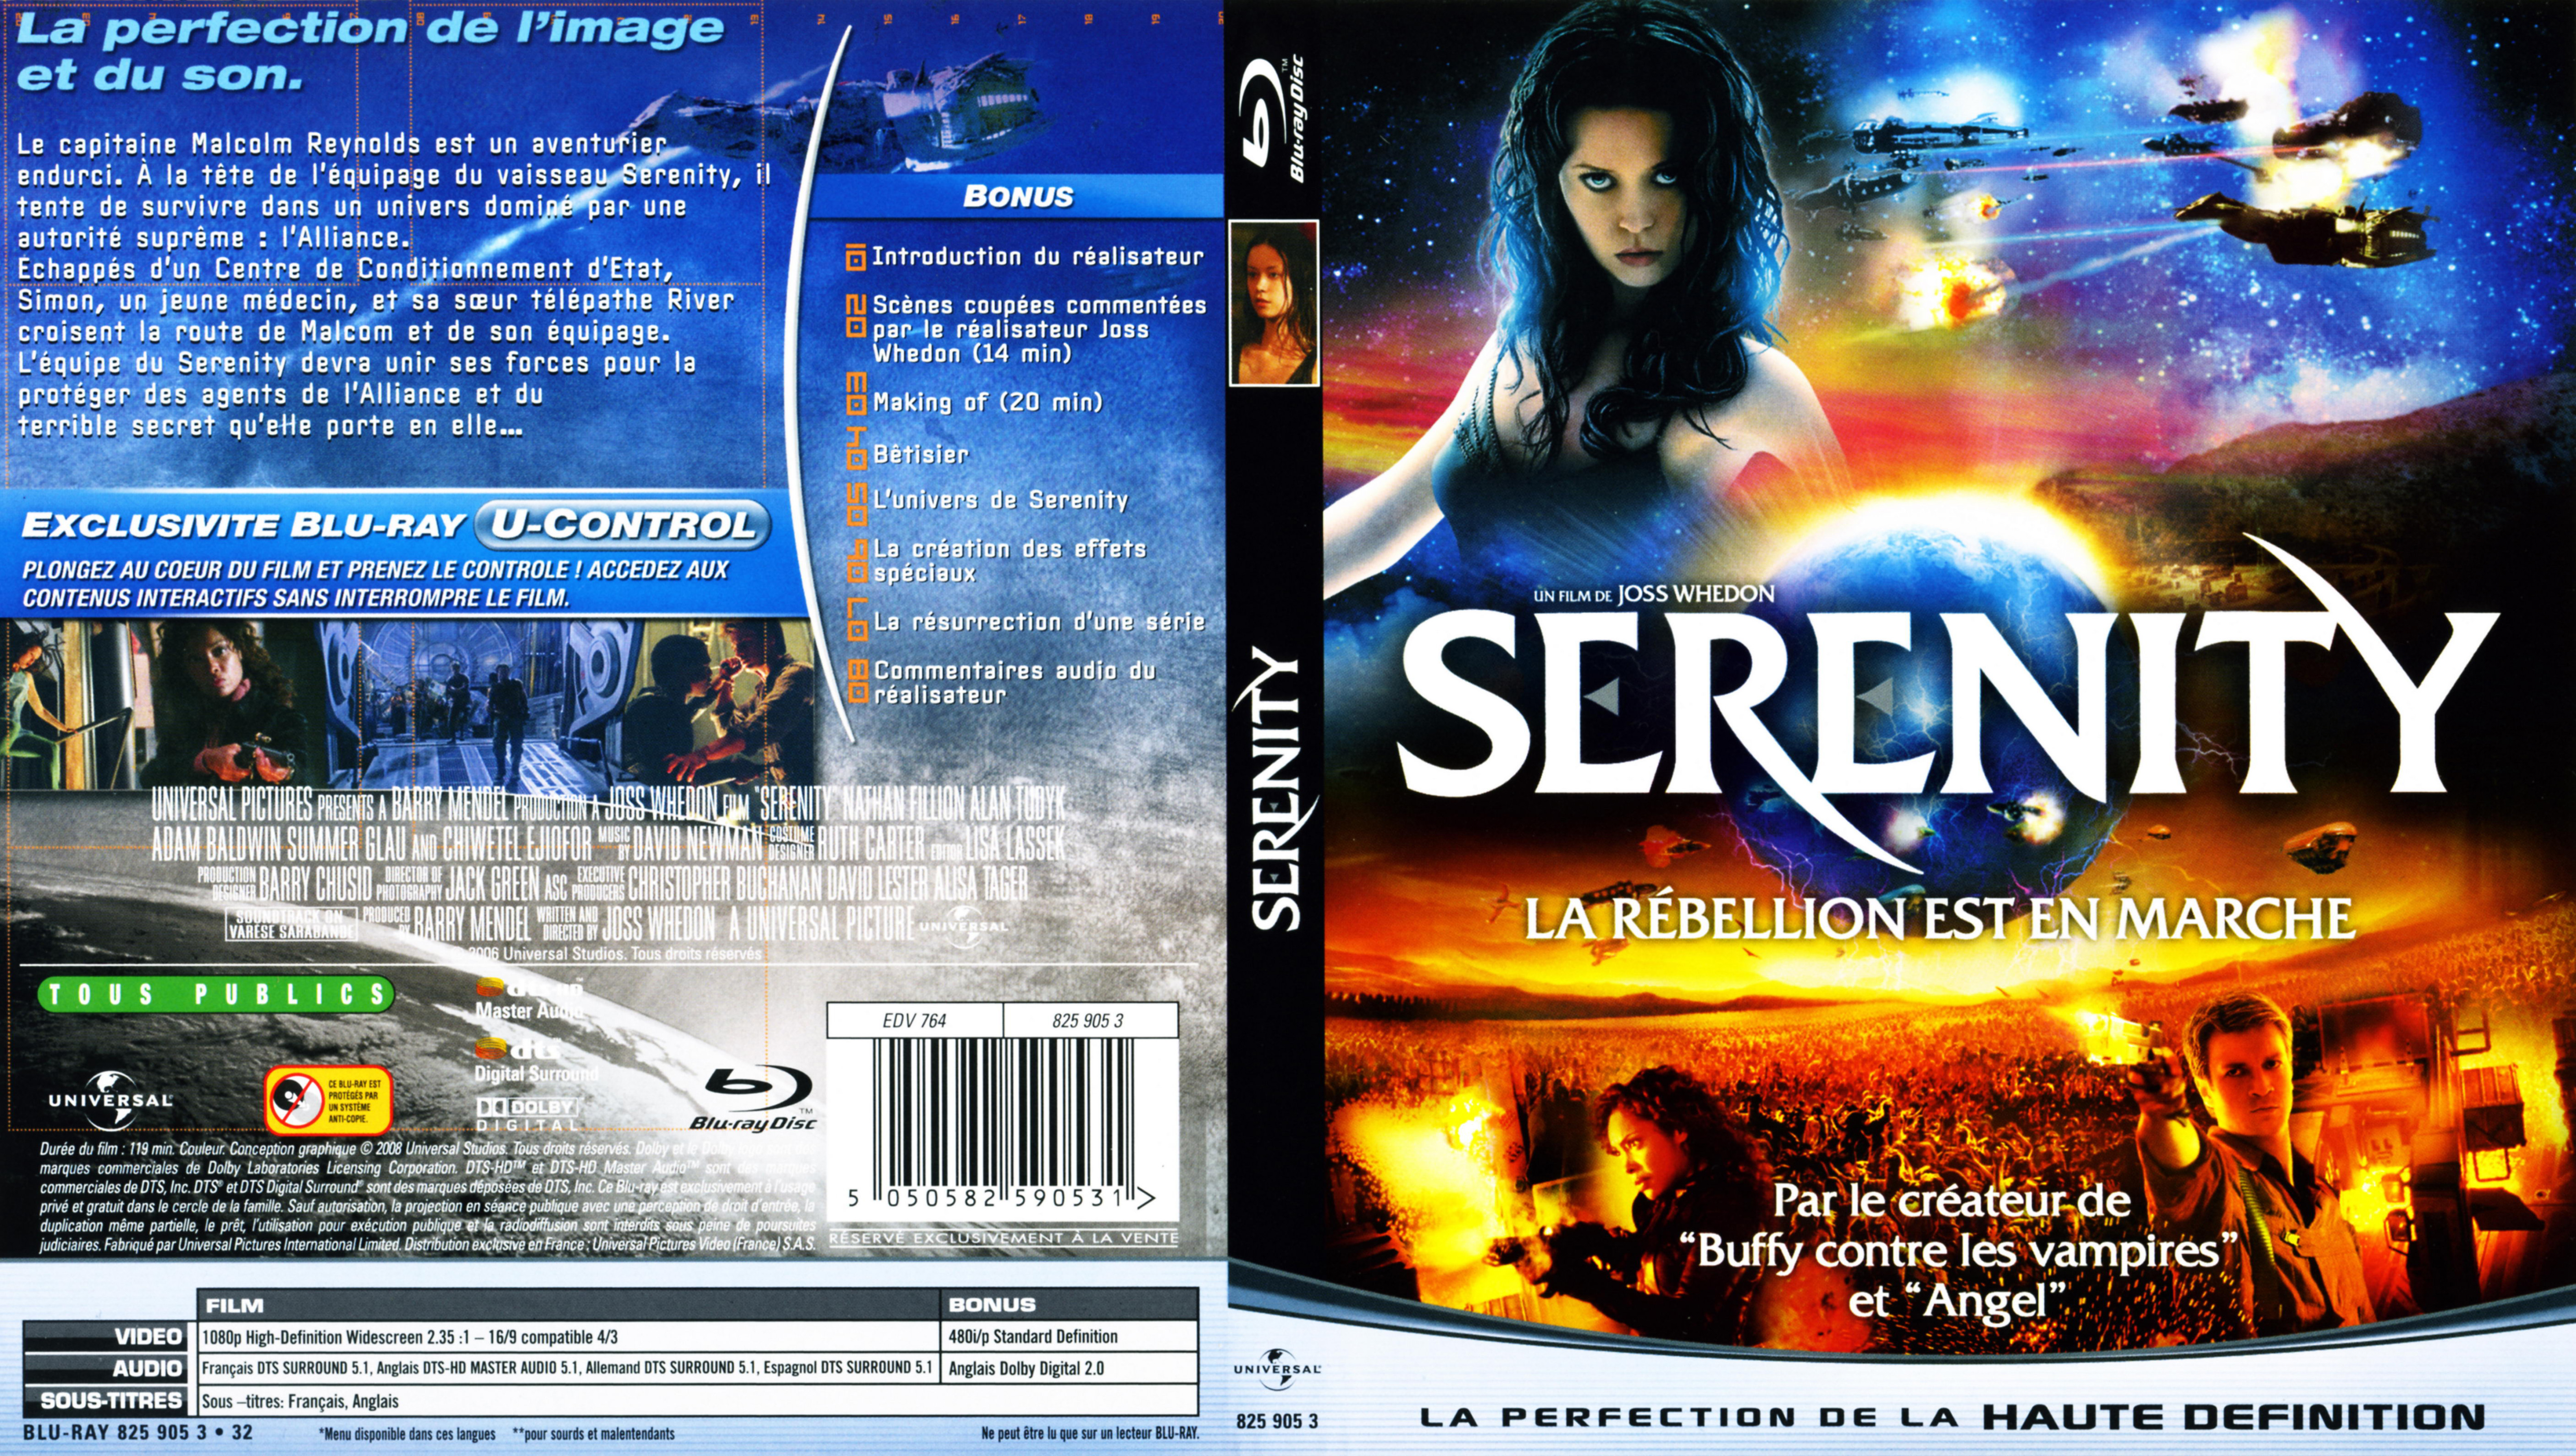 Jaquette DVD Serenity (BLU-RAY)